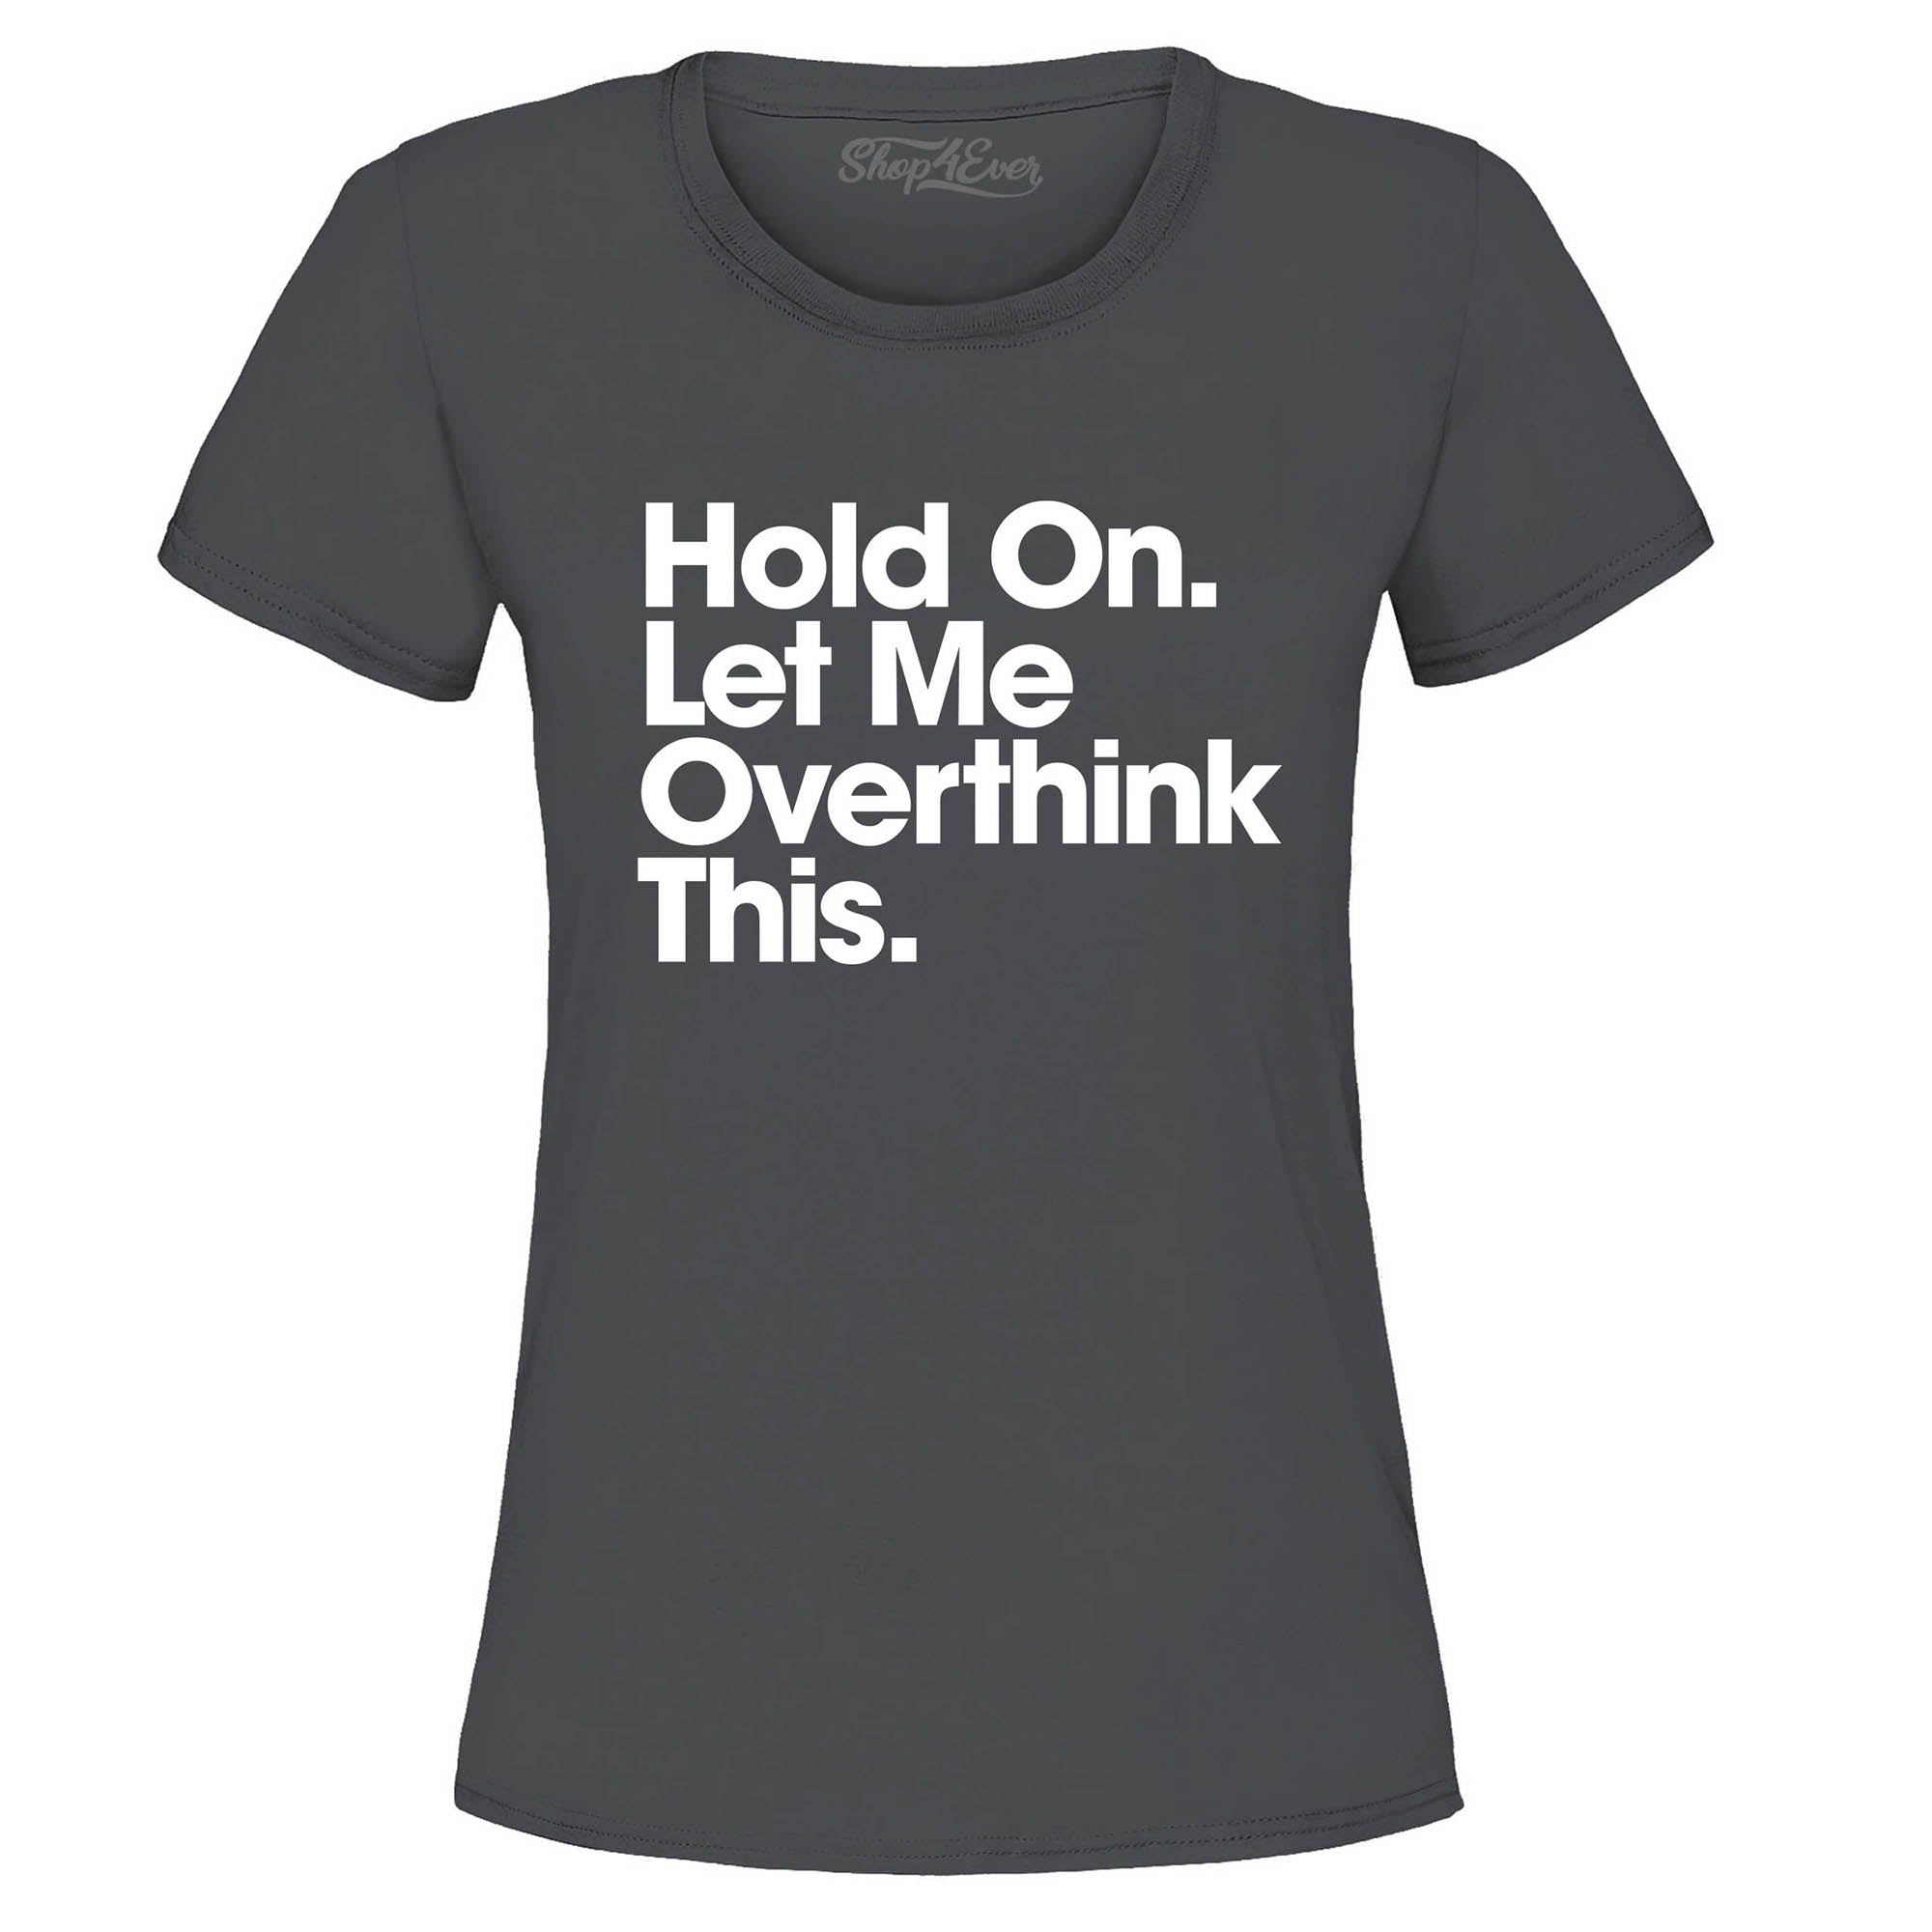 Hold On. Let Me Overthink This. Women's T-Shirt